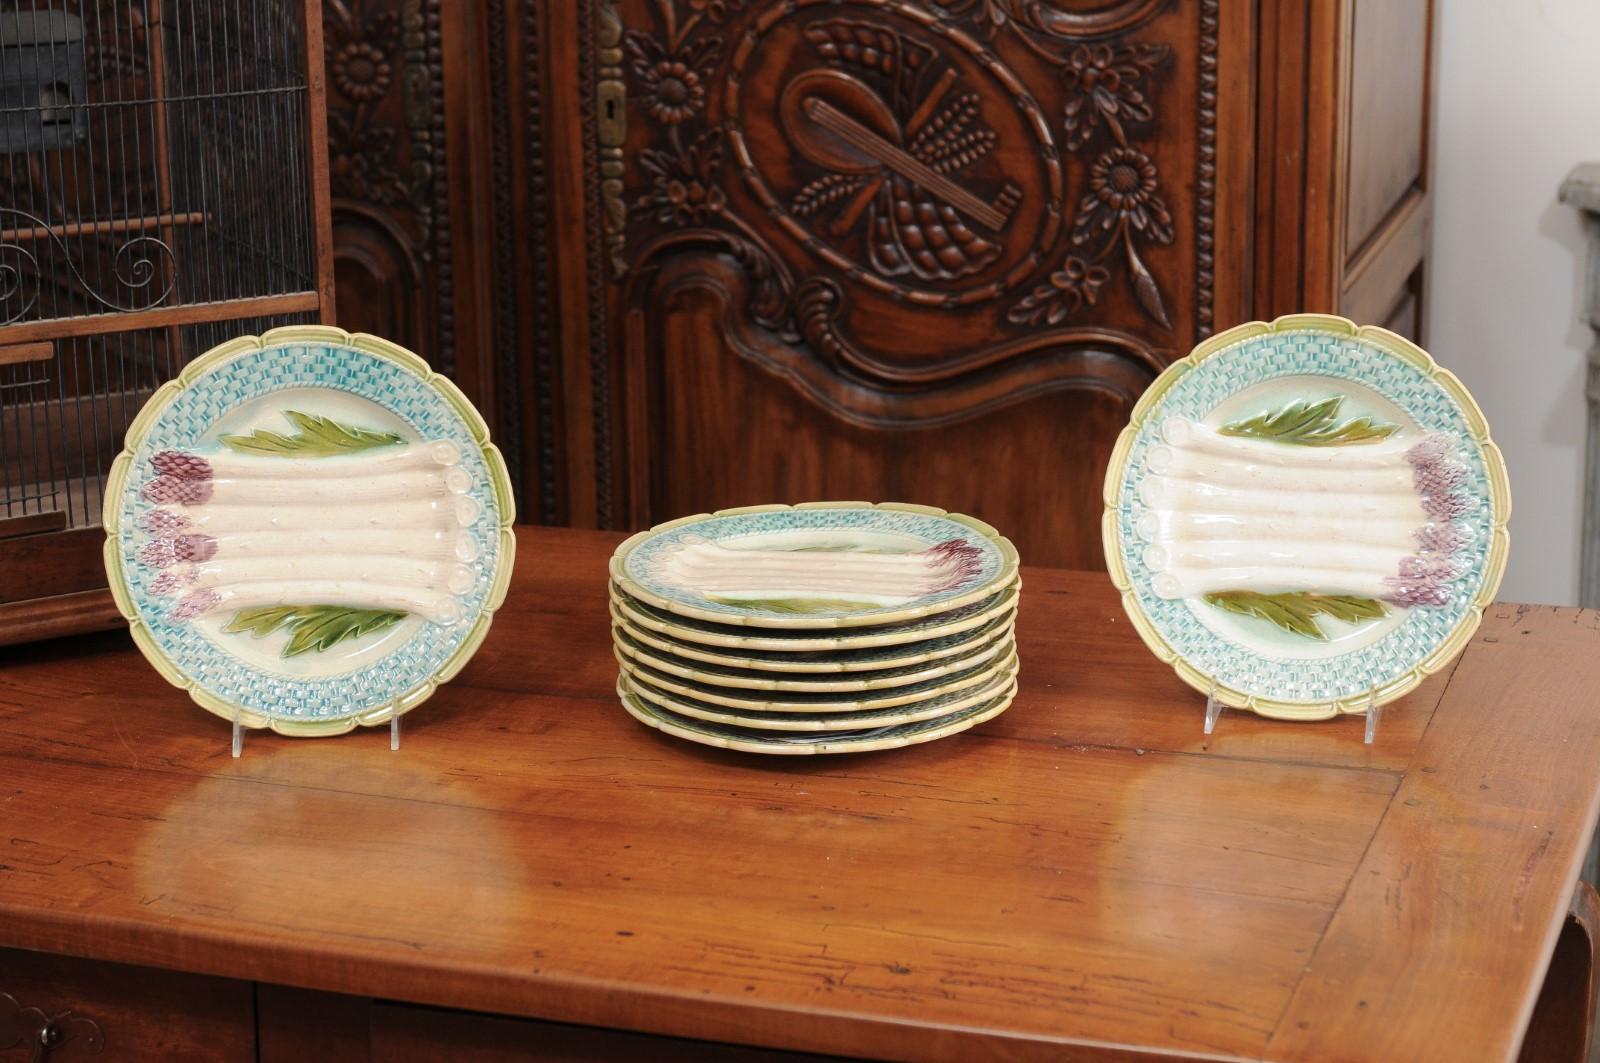 A French Majolica asparagus plate from the late 19th century, with scalloped edge and turquoise and green accents. We currently have nine plates available, priced and sold individually $195 each. Created in France during the last quarter of the 19th